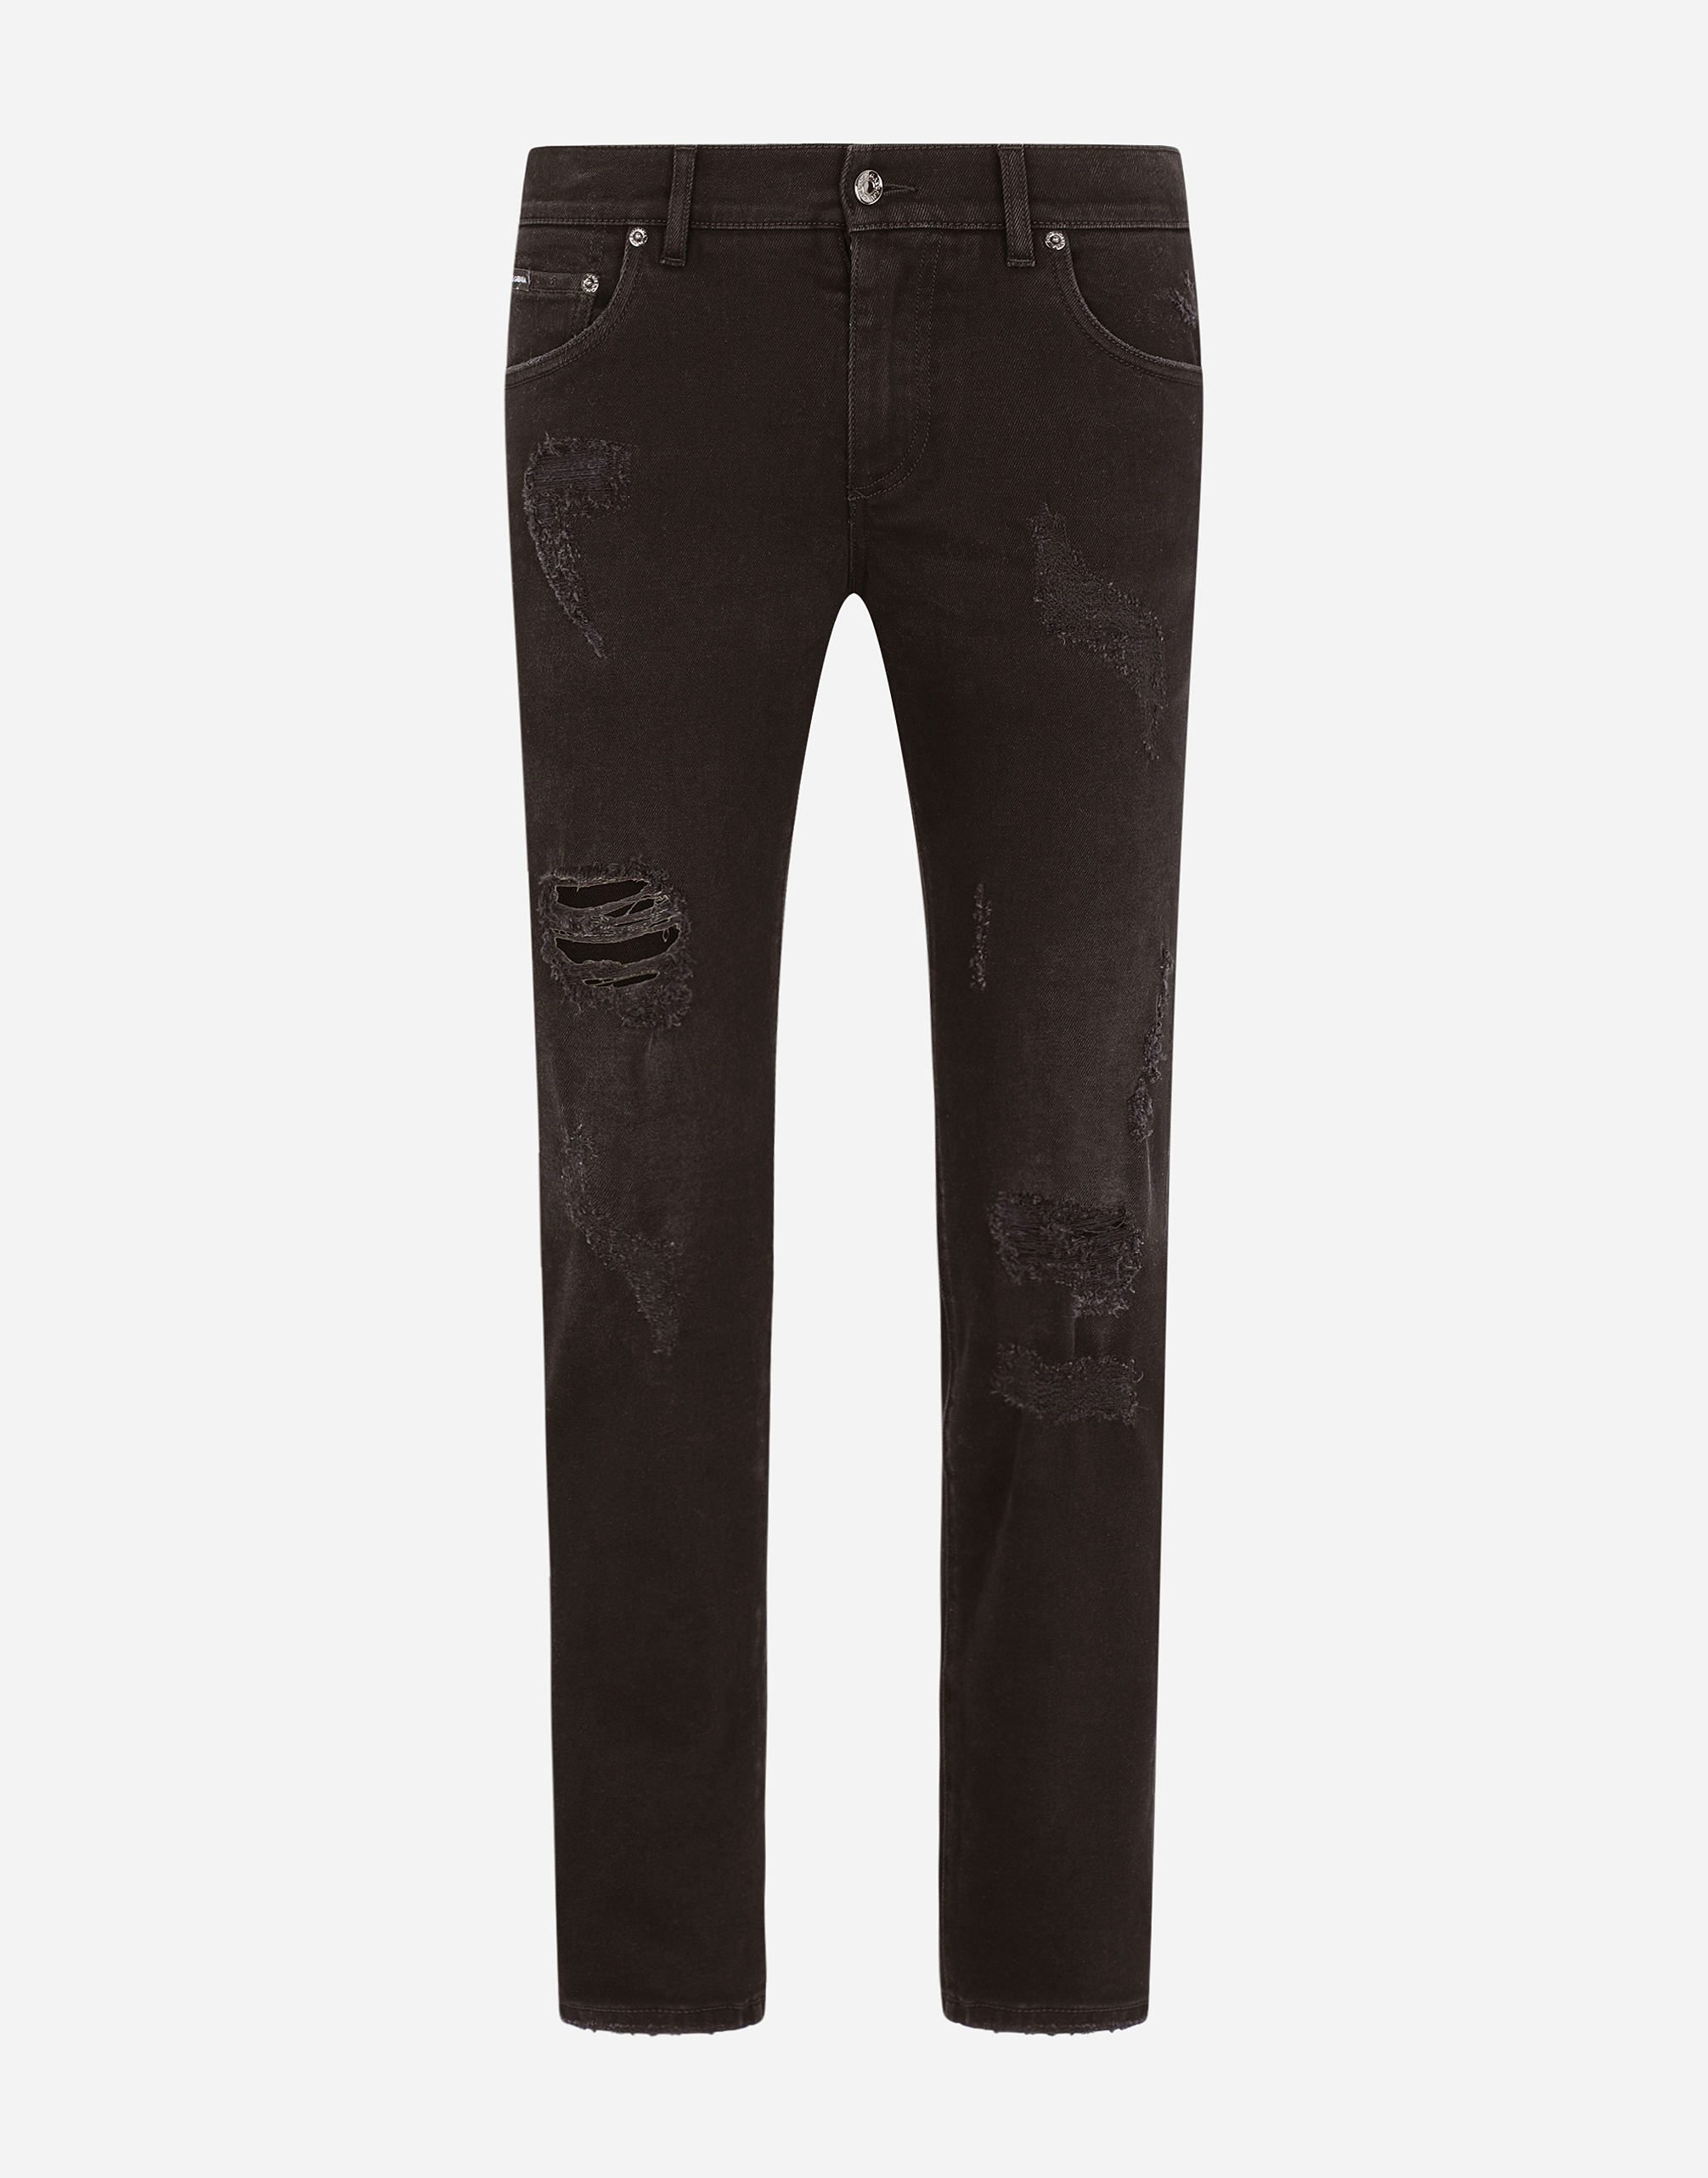 Black skinny stretch jeans with repaired rips in Black